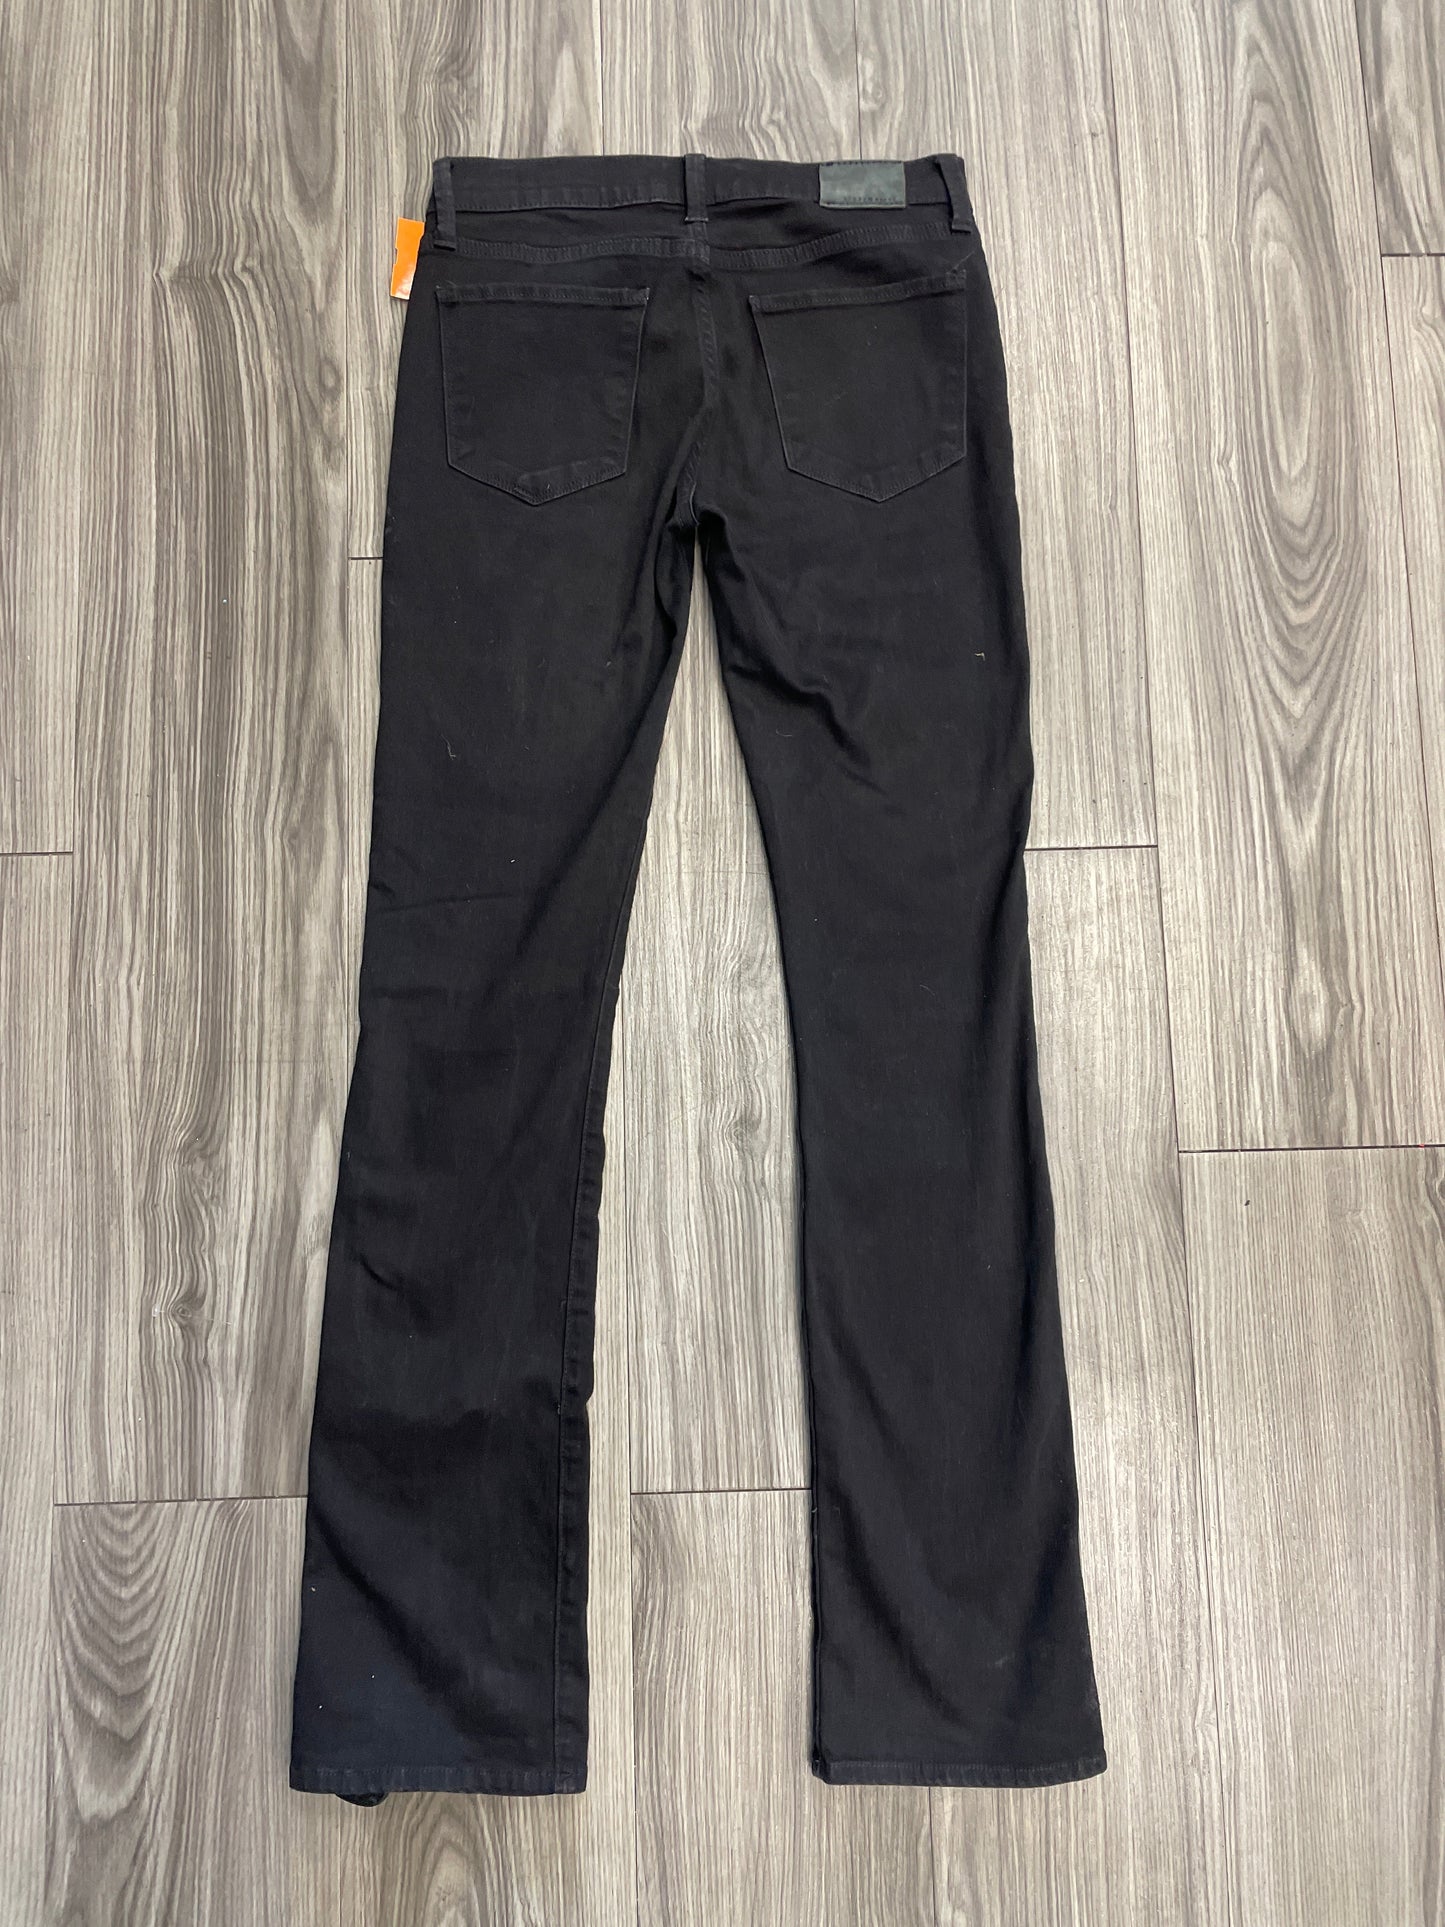 Pants Other By Lucky Brand  Size: 4